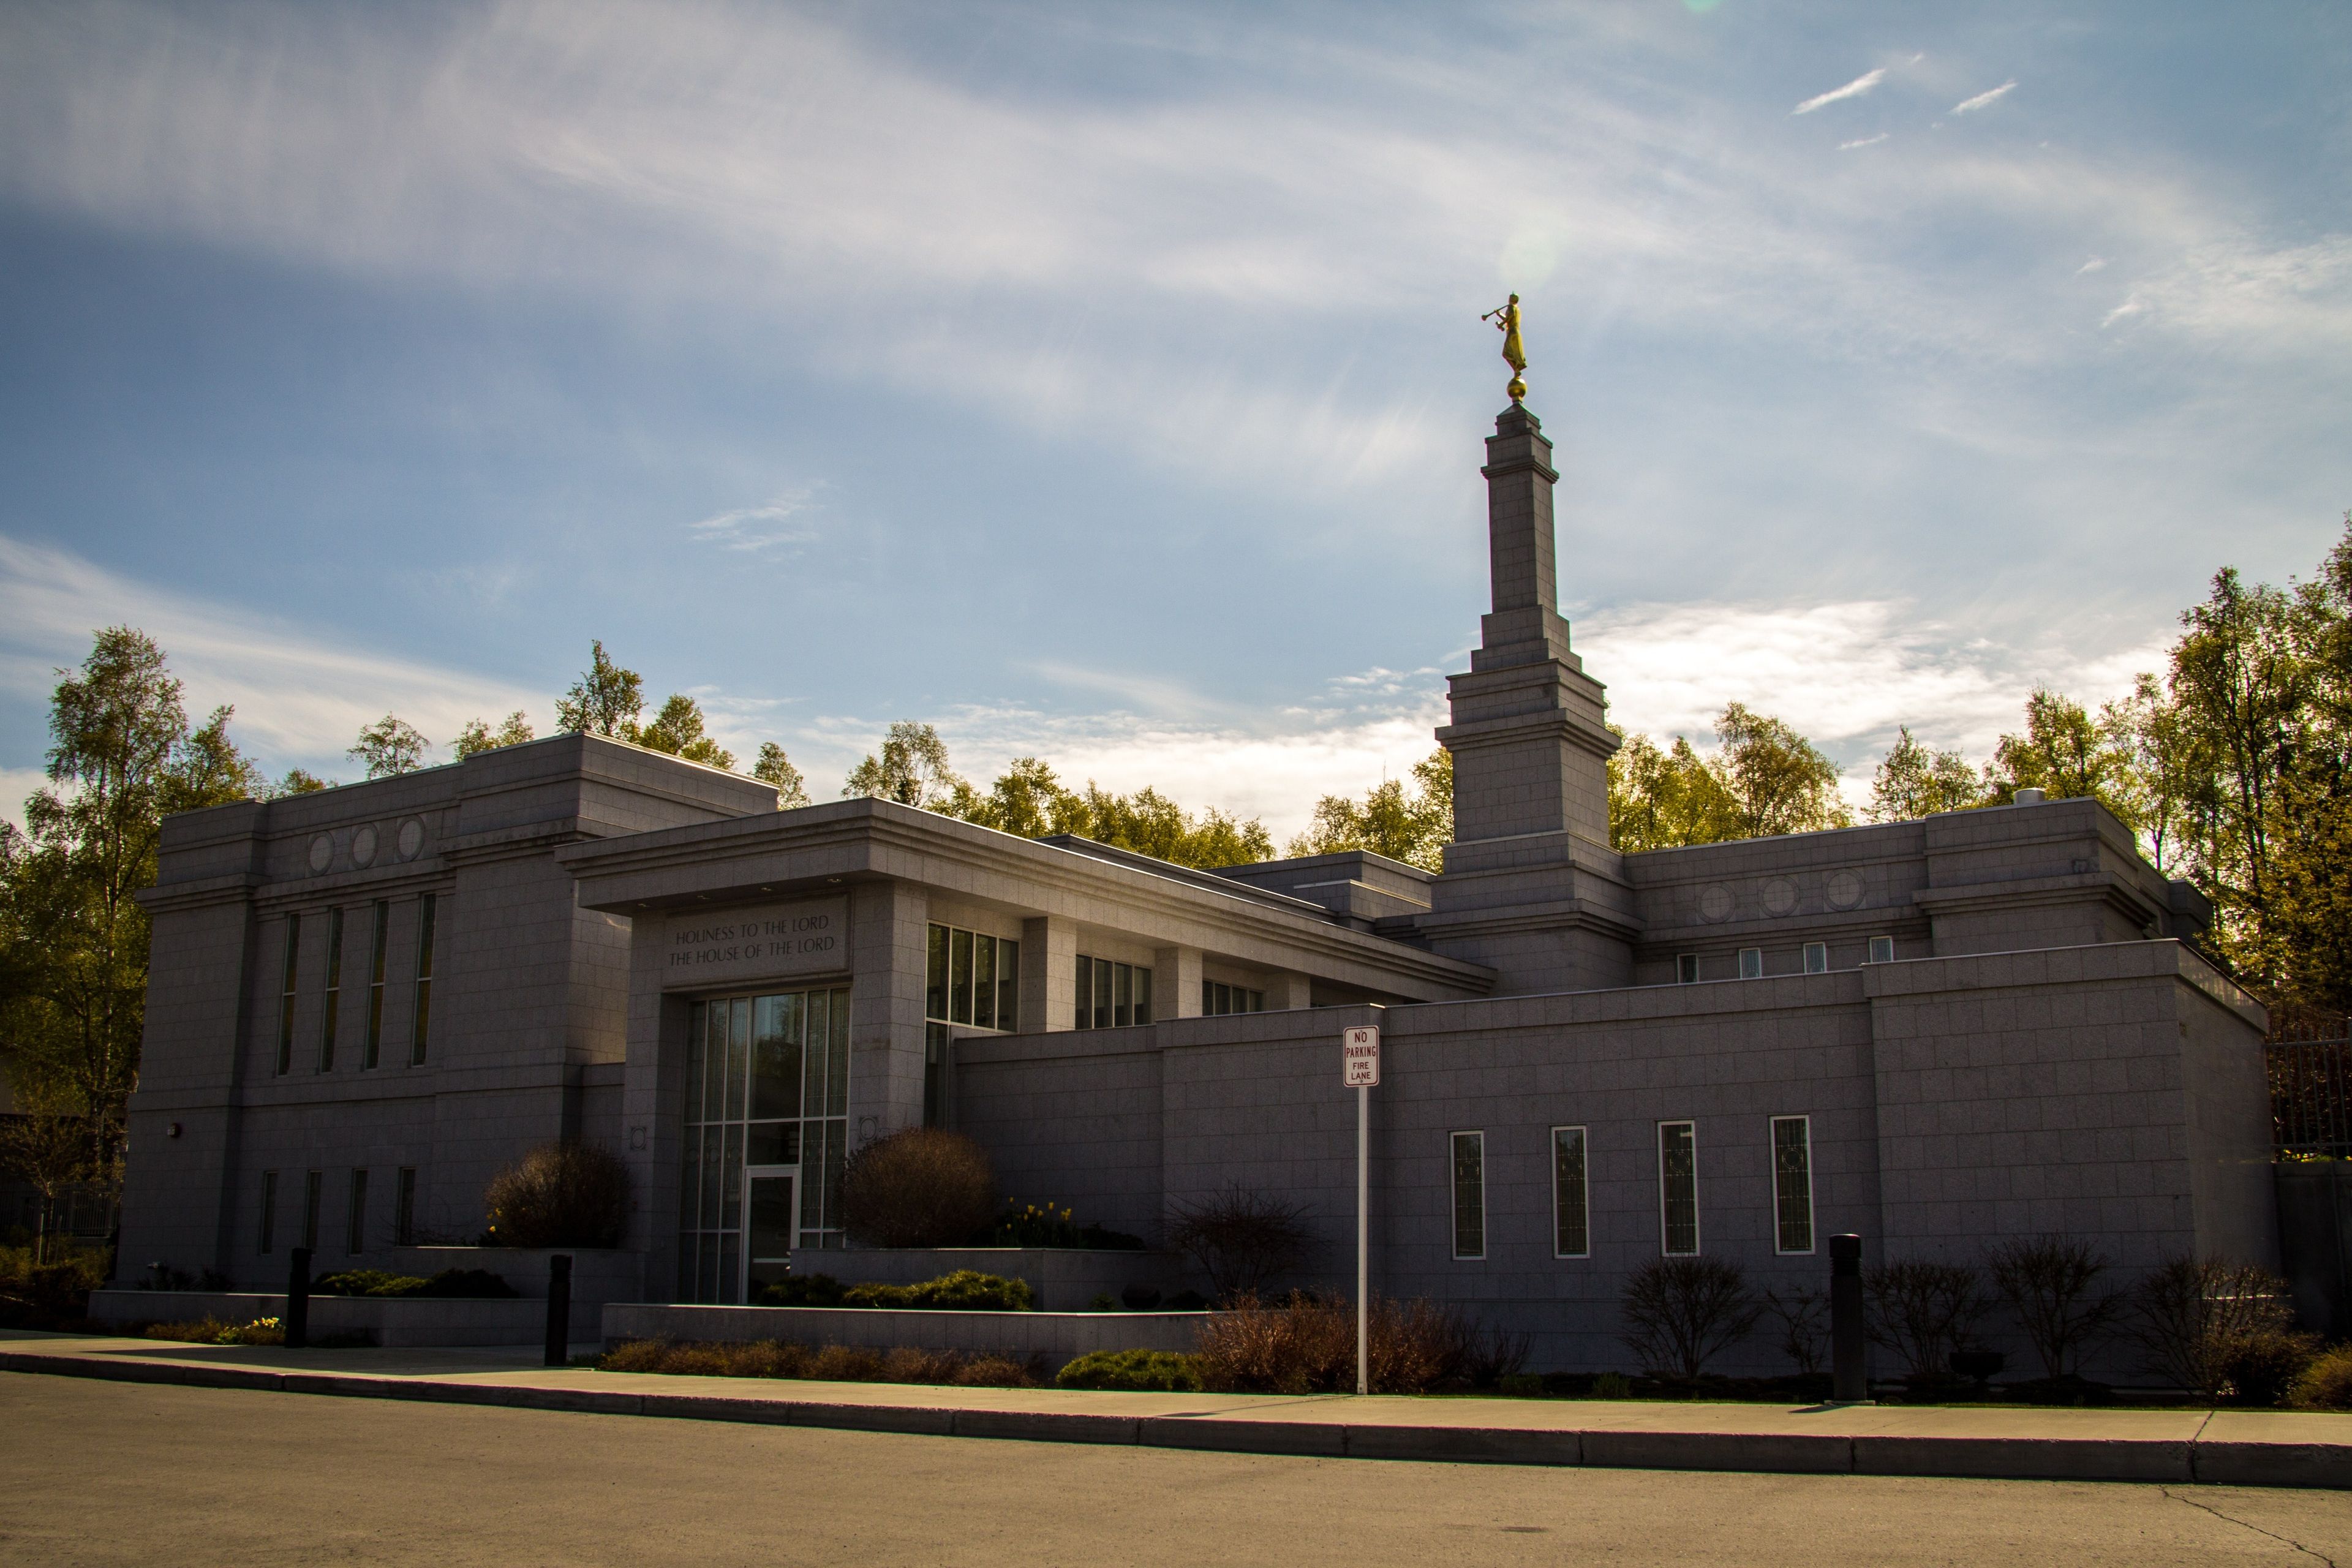 An exterior view of the Anchorage Alaska Temple during the day.